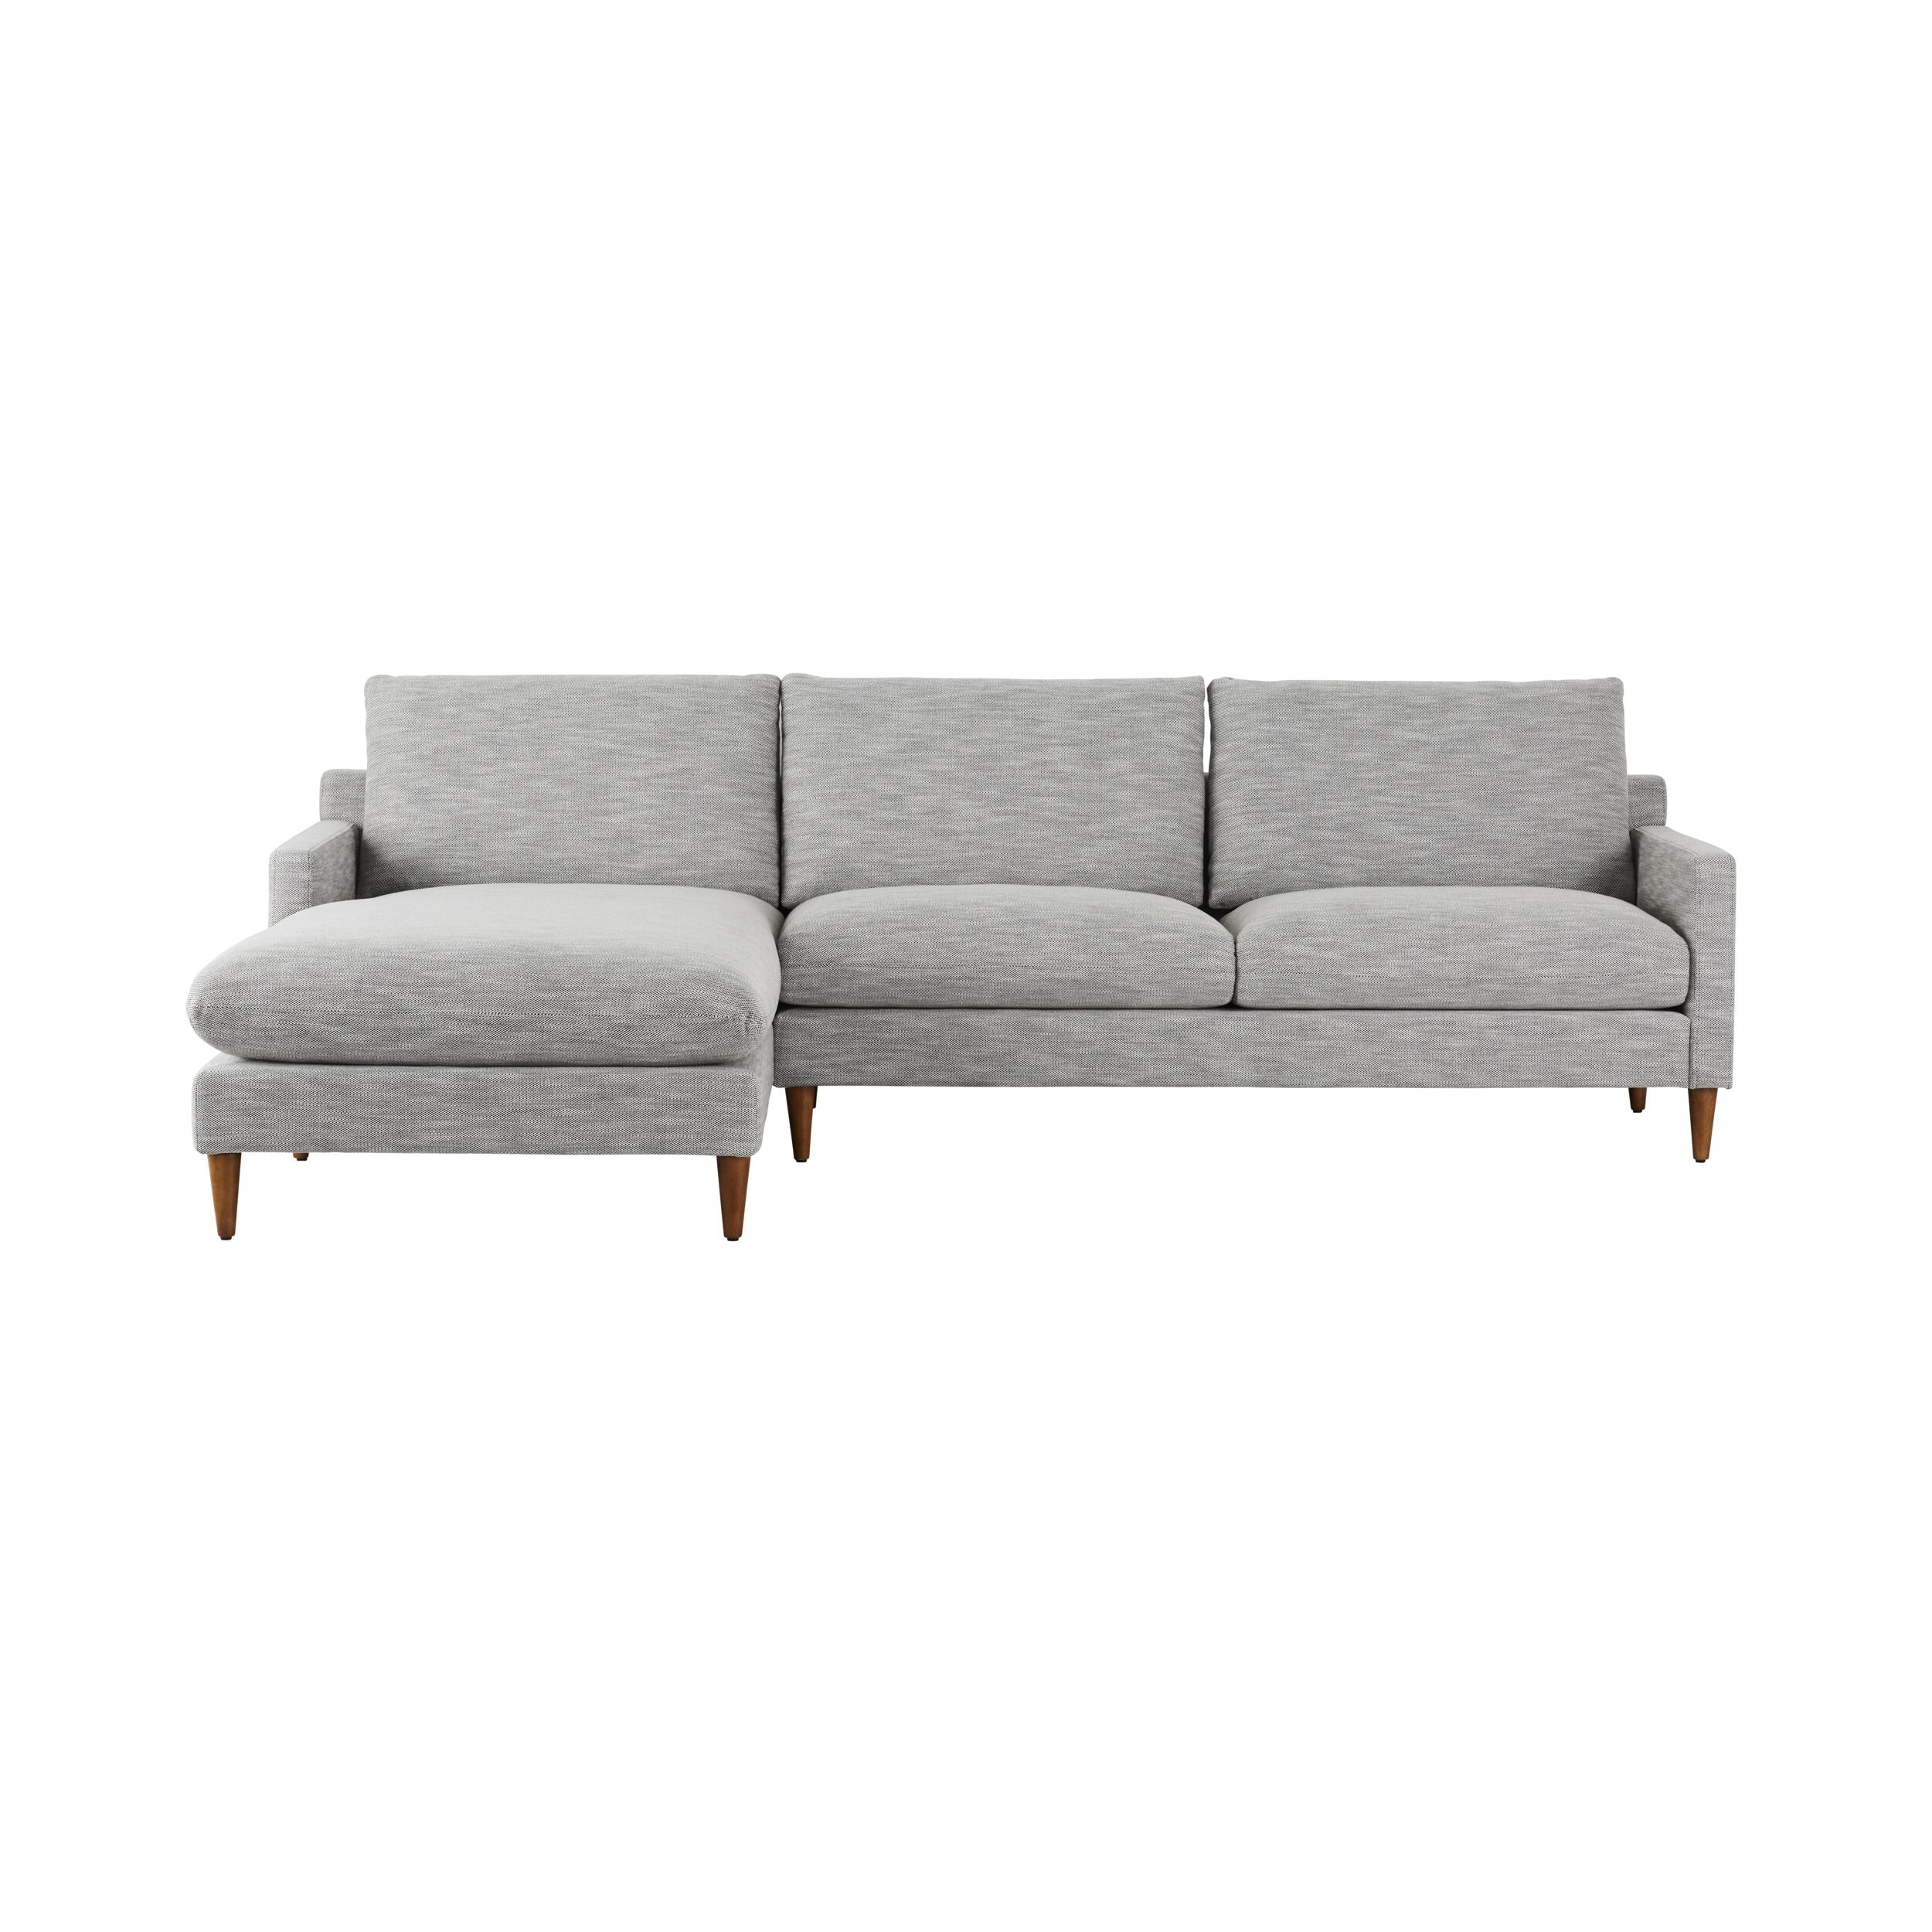 Easton 3 Seater Fabric Sofa with Left Chaise Grey Flint